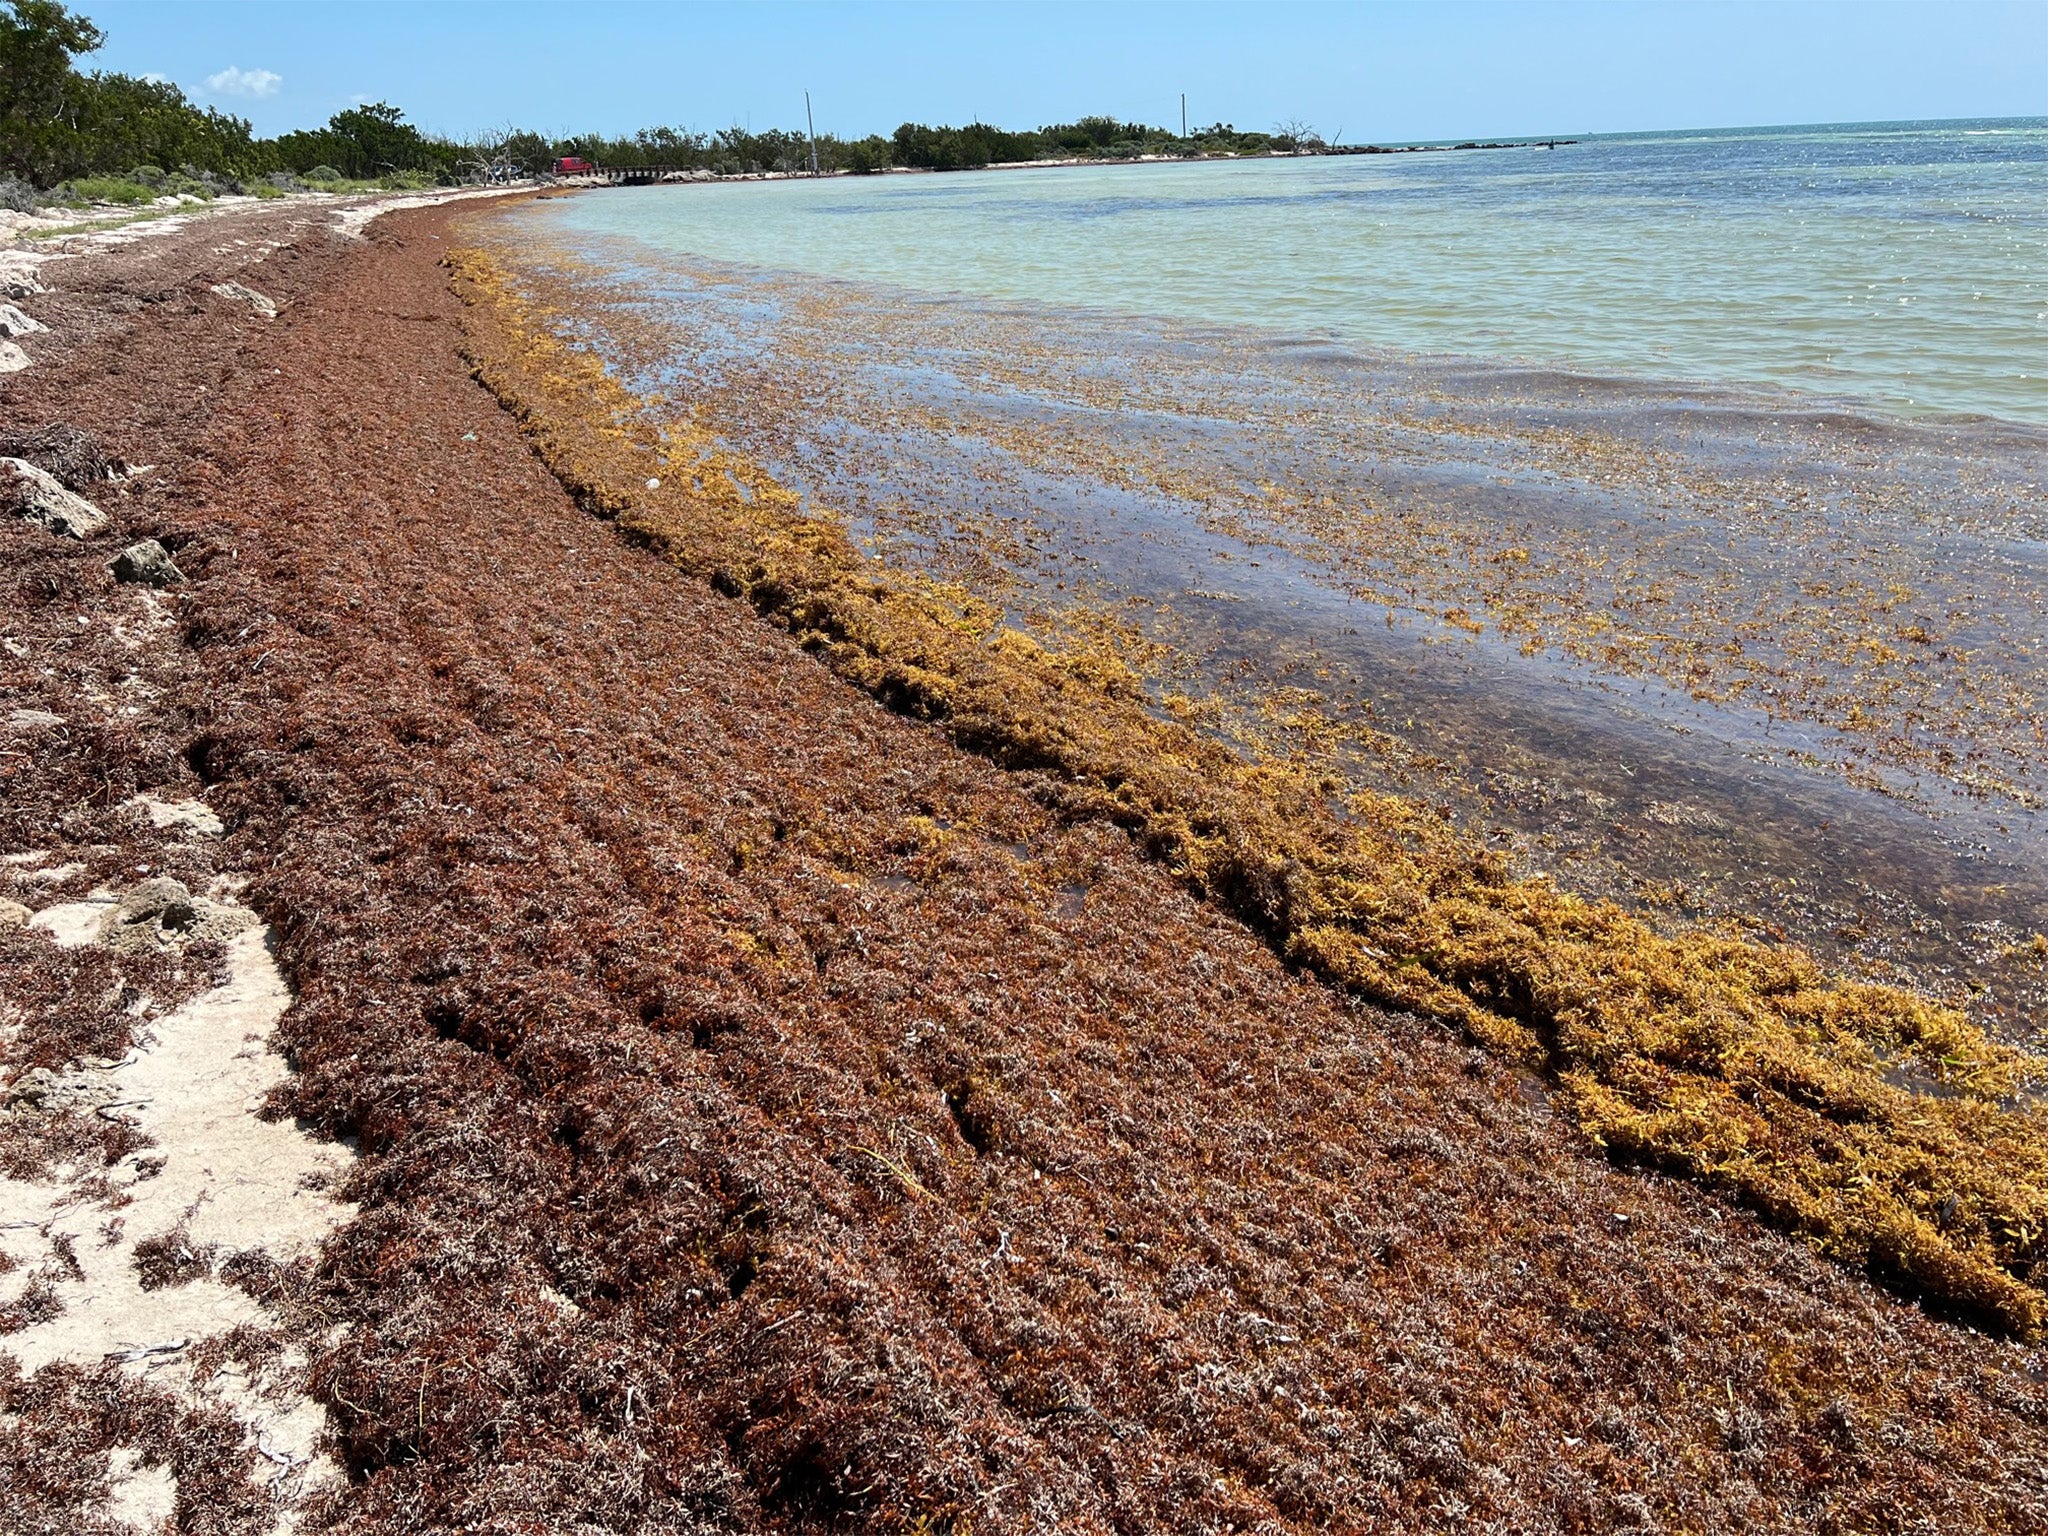 The beach at Bahia Honda State Park in the Florida Keys covered in Sargassum seaweed in late March